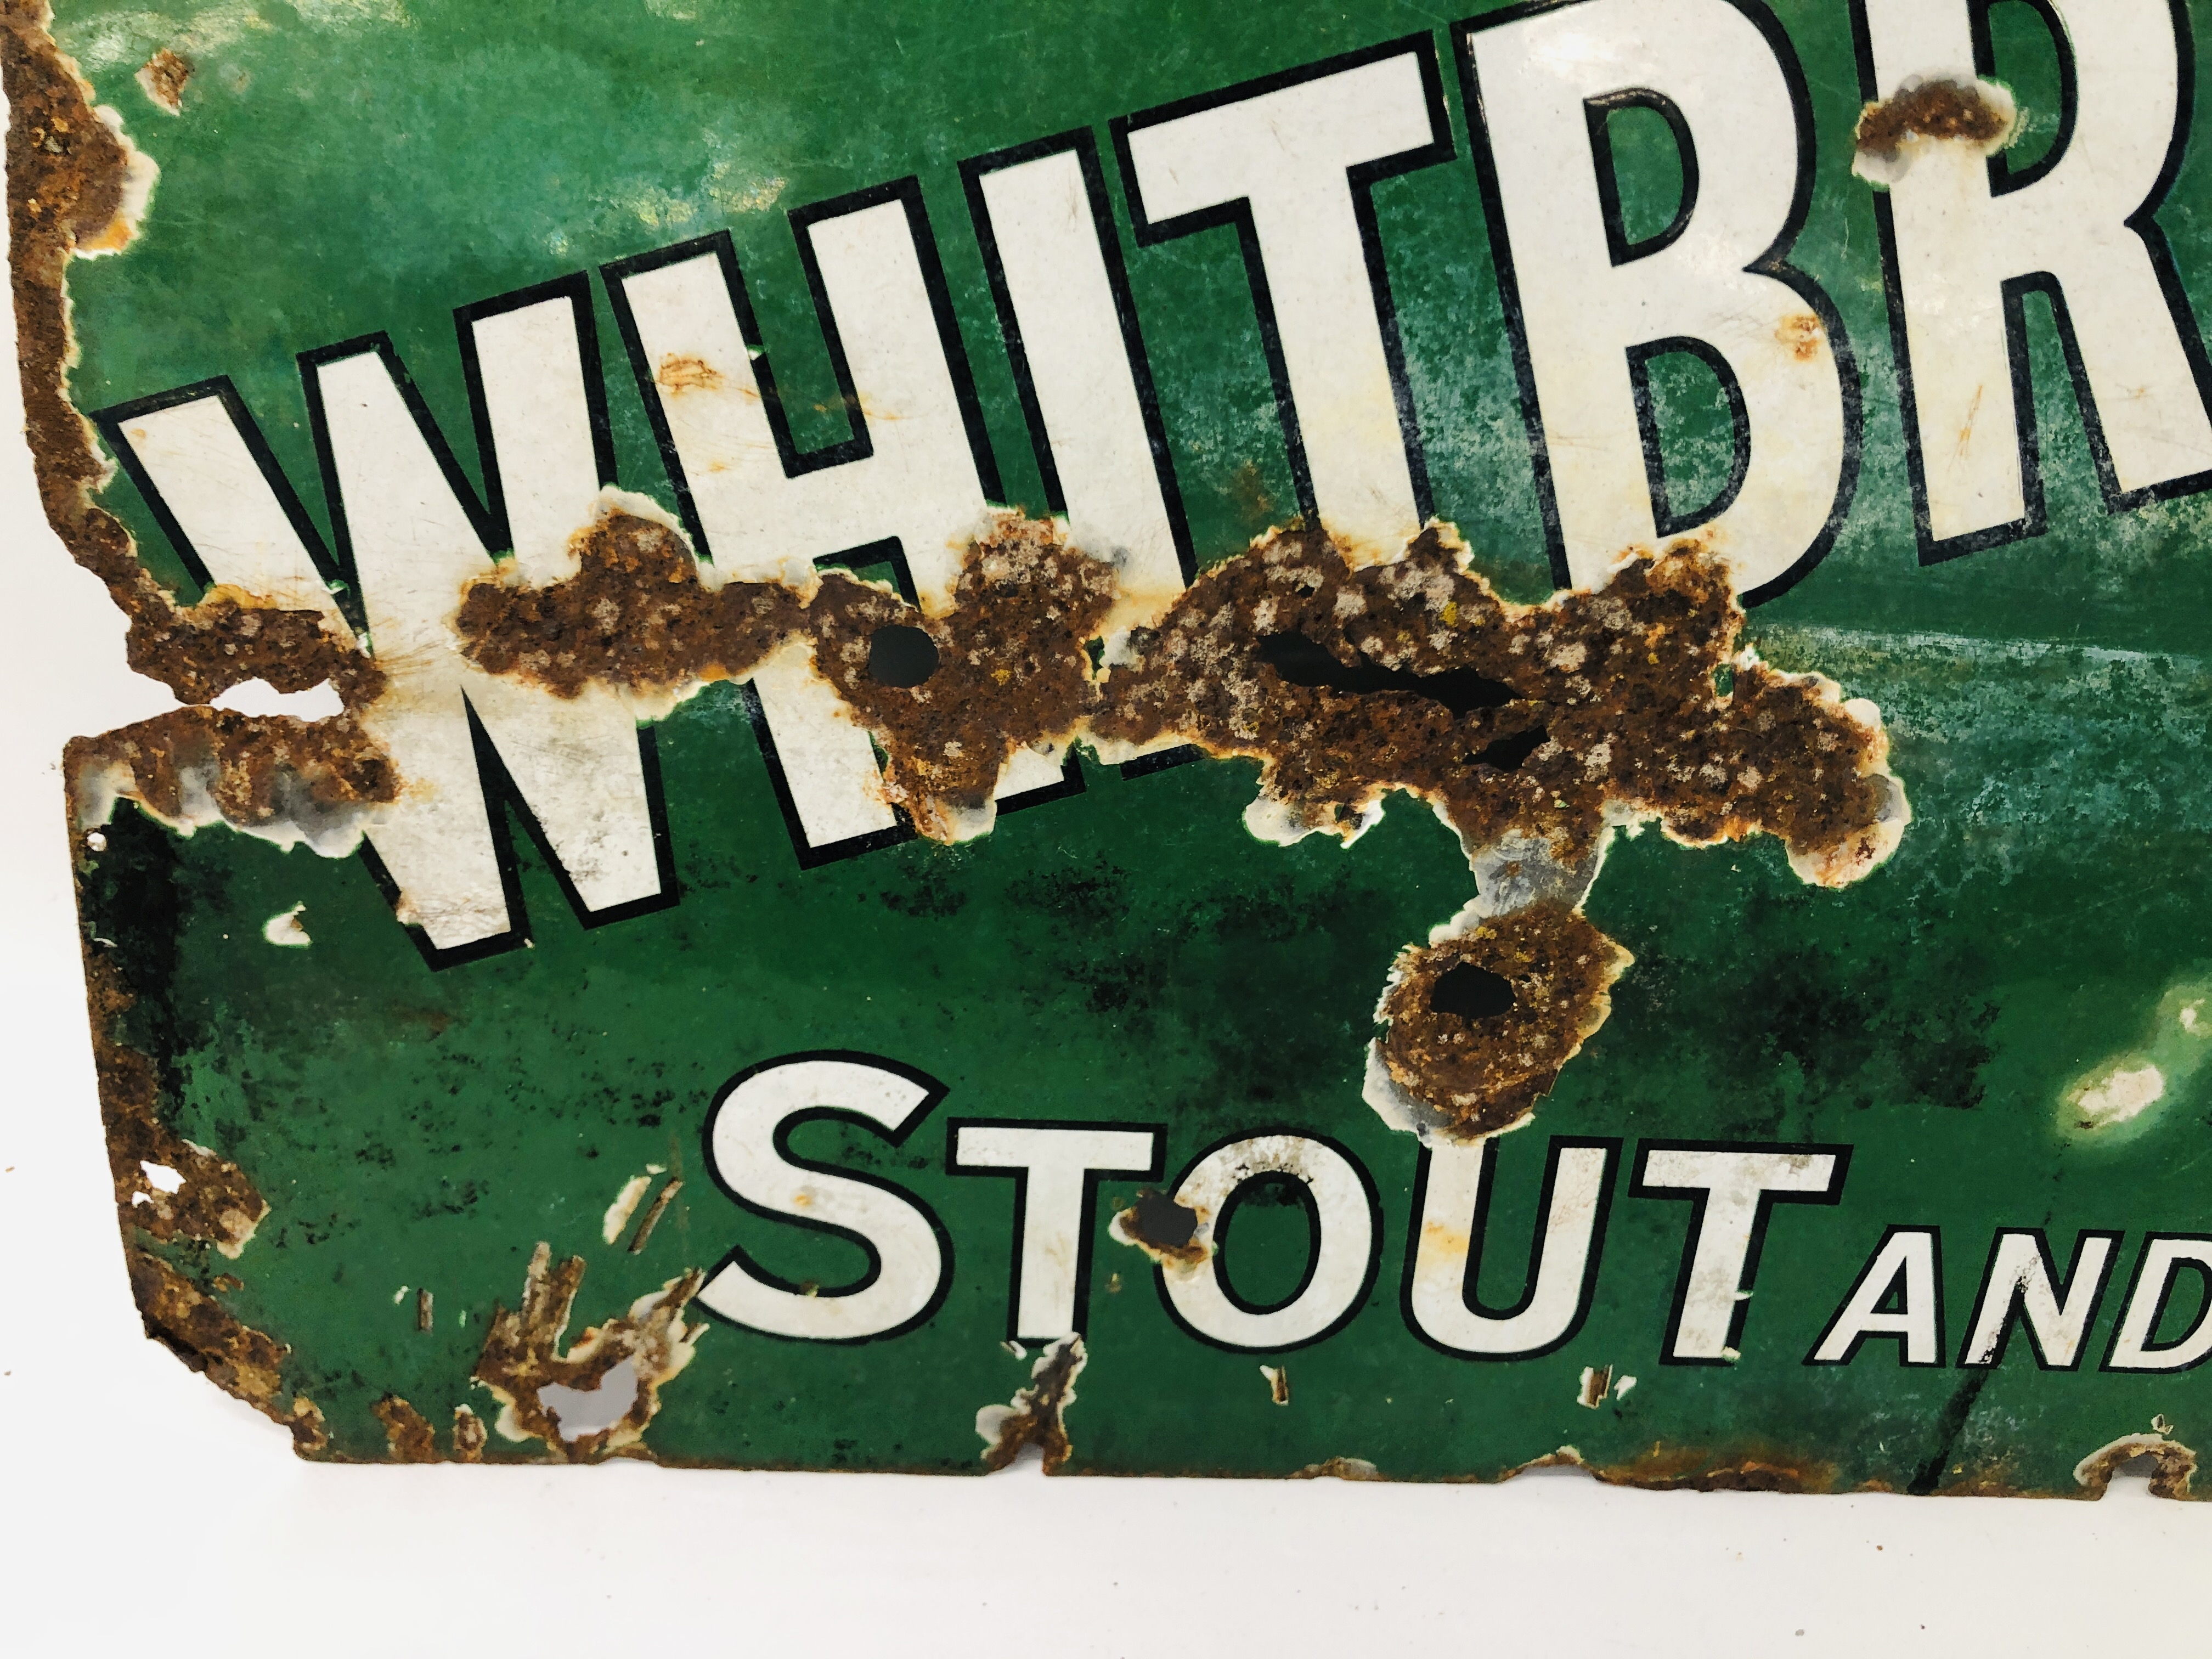 A VINTAGE "ASK FOR WHITBREAD STOUT AND ALE" ENAMEL ADVERTISING SIGN - W 69CM. H 53CM. - Image 5 of 6